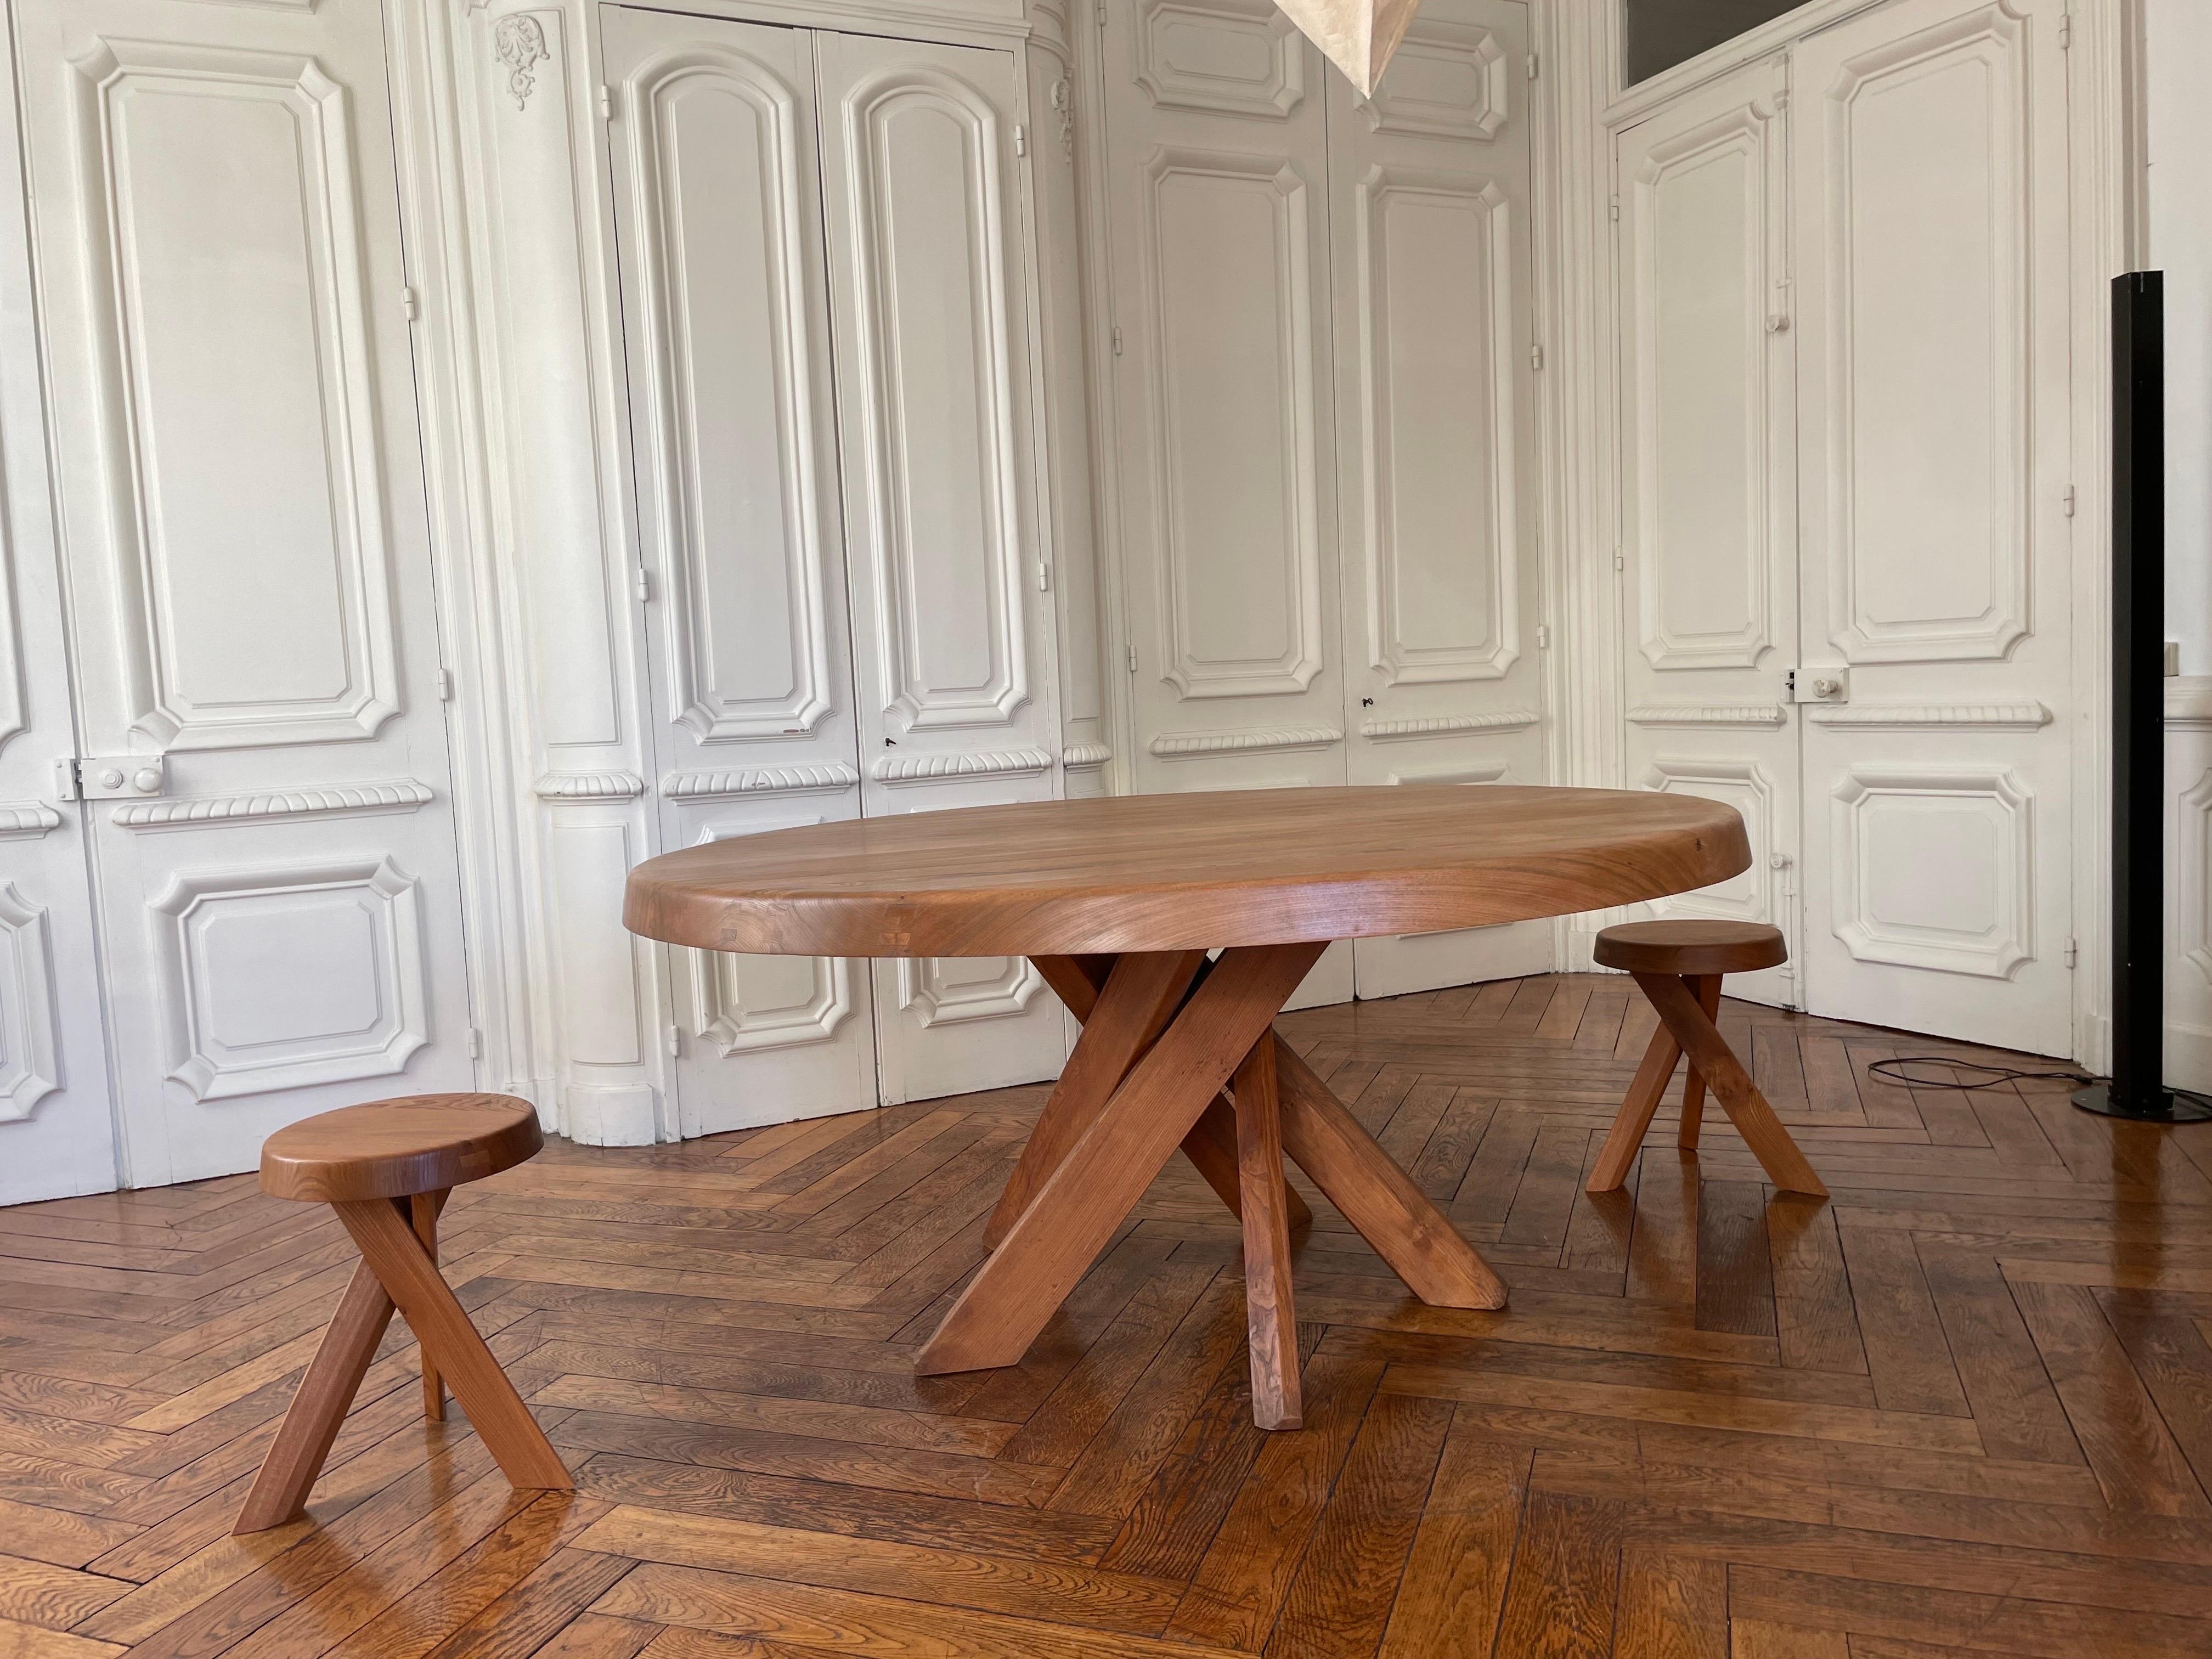 Round Table T 21 E Round SFAX Pierre CHAPO 1979 In French Elm. Table diameter 160 cm with a thickness of 7 cm, central leg in removable beam, 12 place settings. in a very beautiful patina. with original Chapo invoice 1979 .
Table that fits perfectly